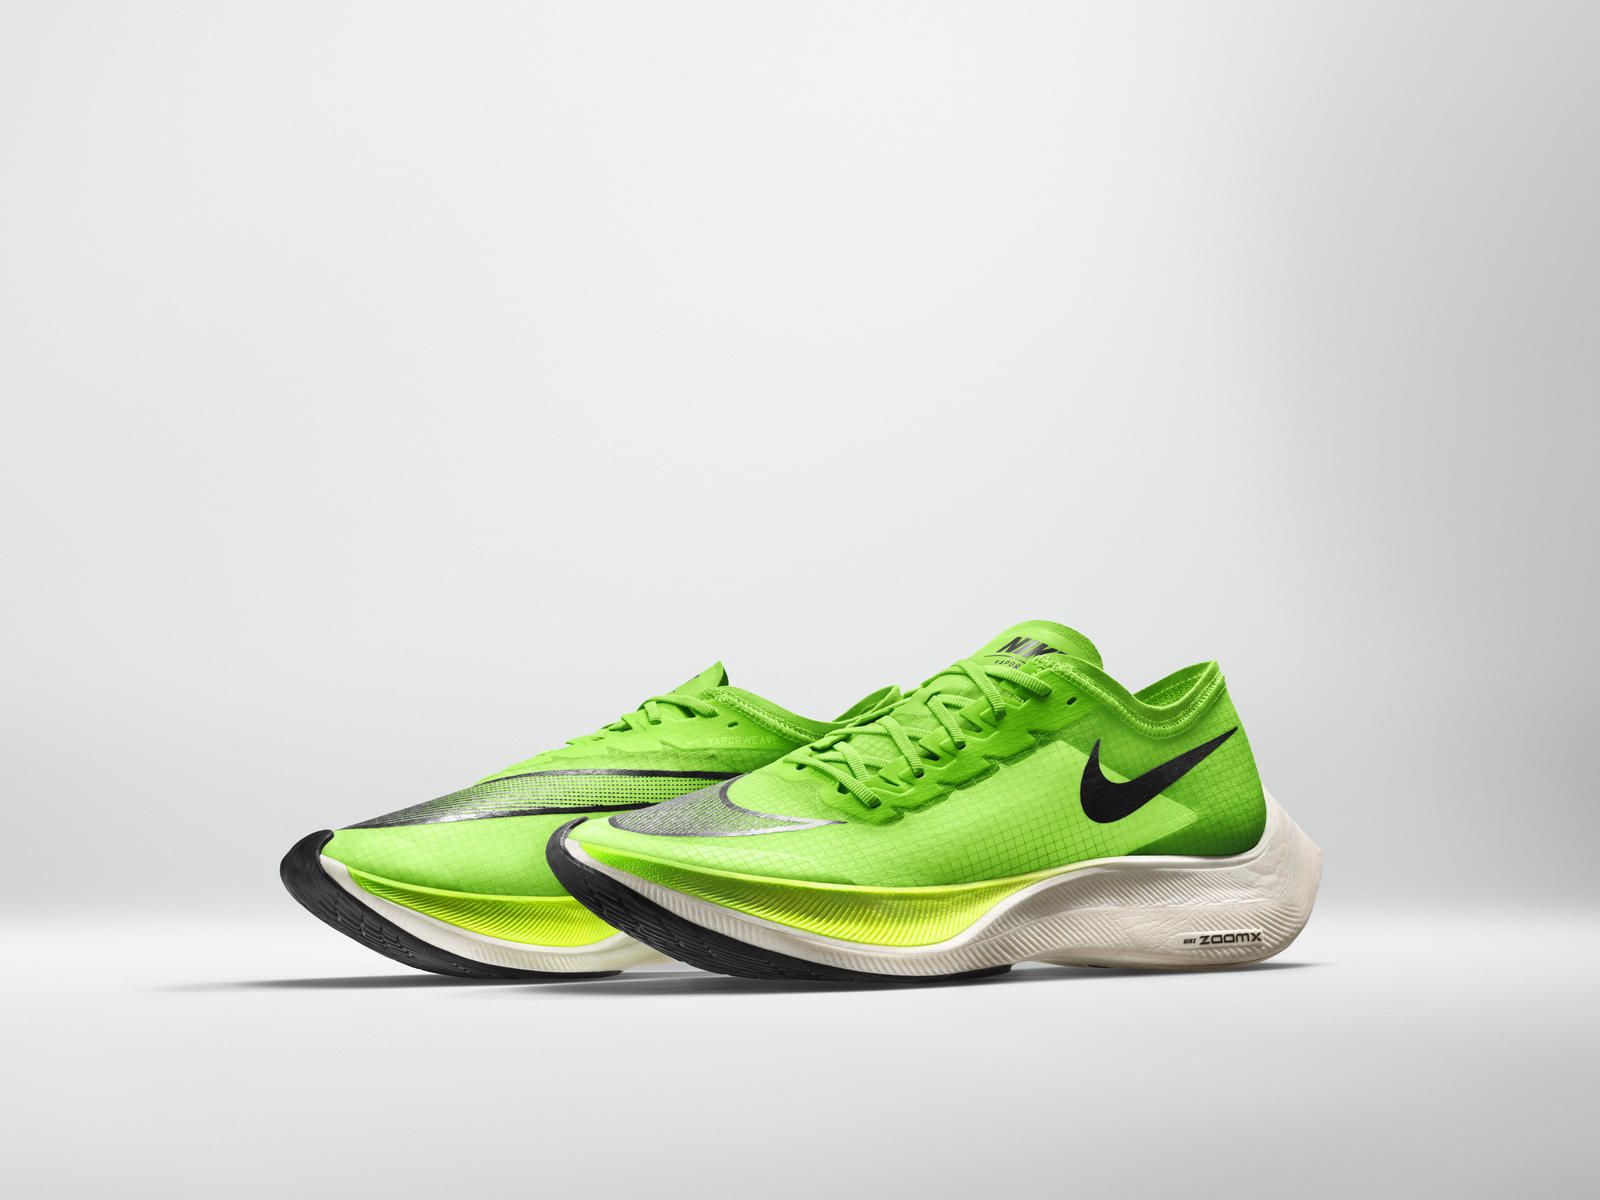 Nike's ZoomX Next% Running Shoe is Now Available